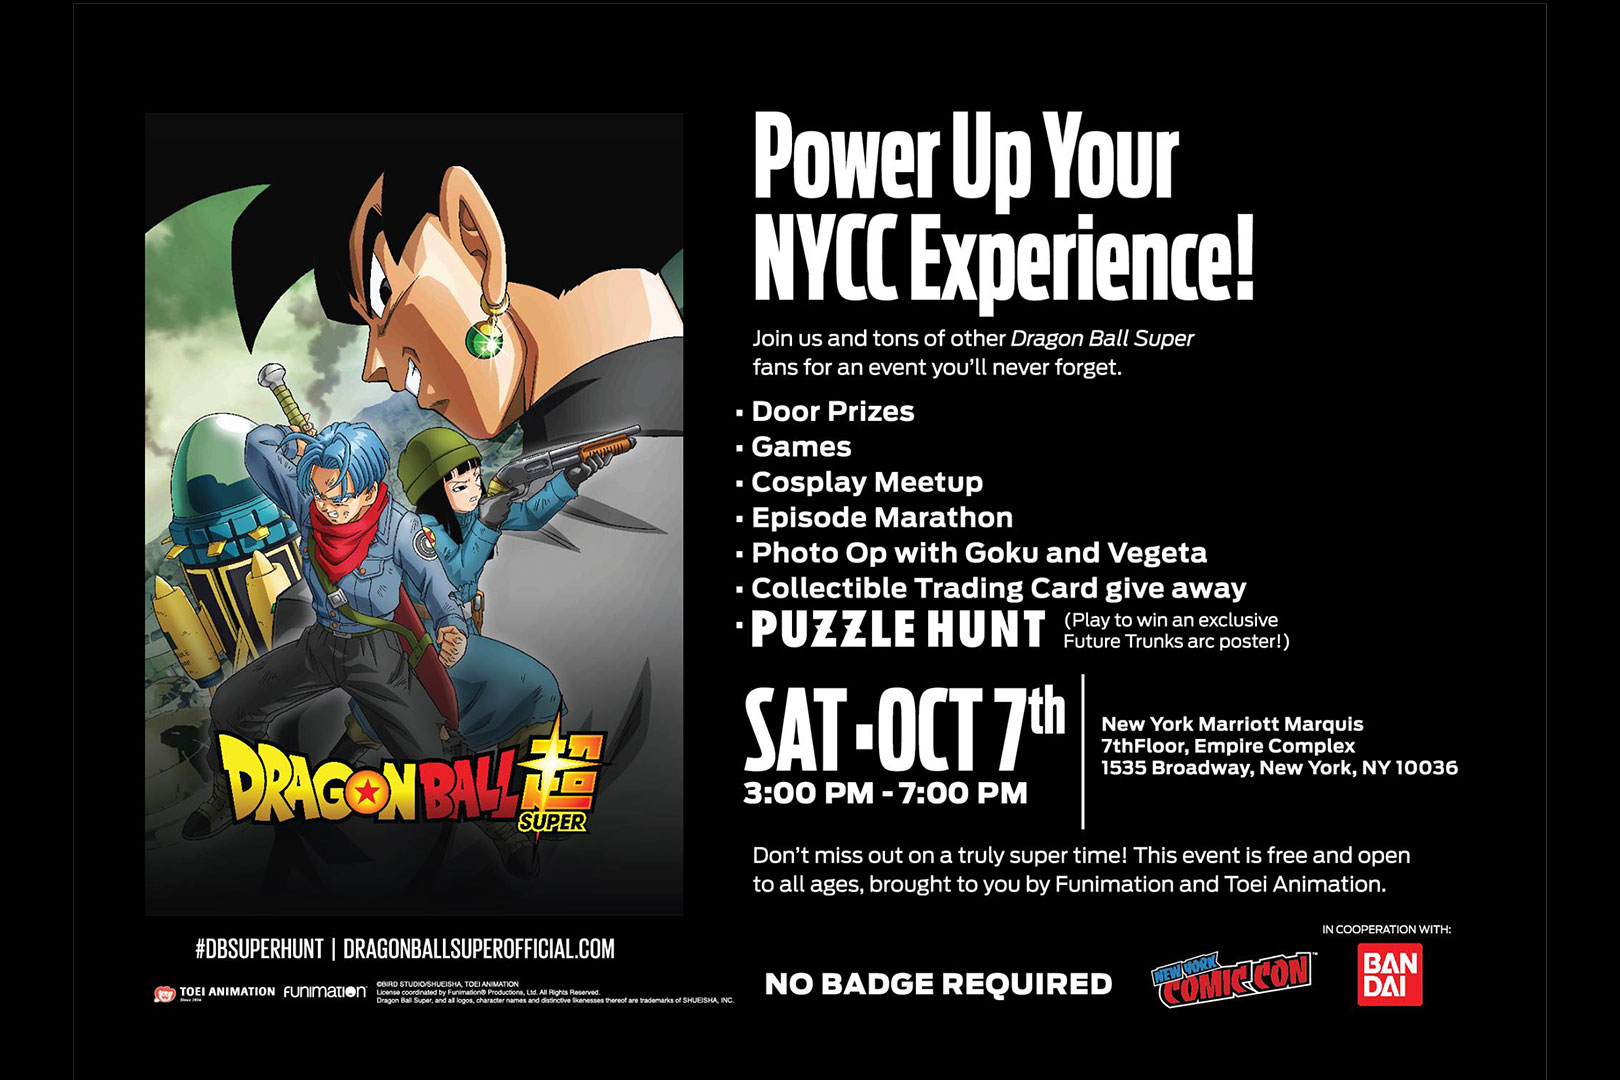 FANS CAN HAVE THE ULTIMATE DRAGON BALL SUPER EXPERIENCE DURING NEW YORK COMIC CON